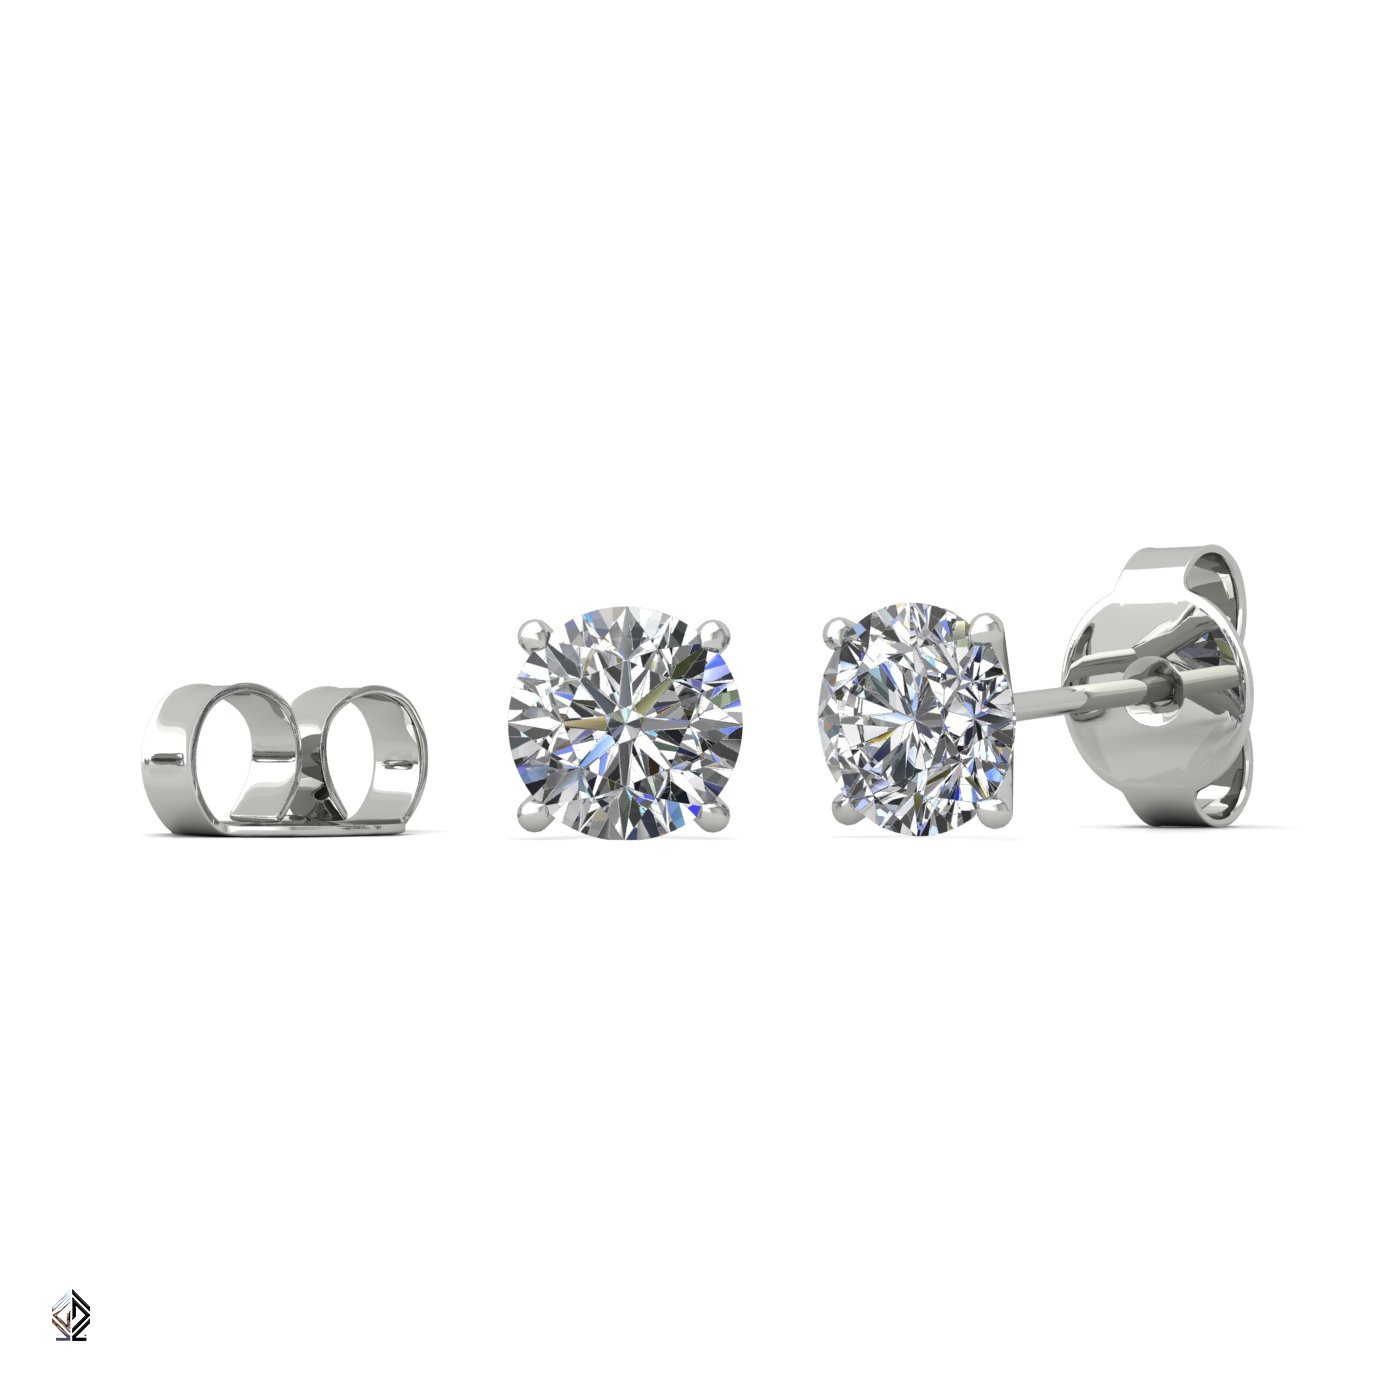 18k white gold 1.0 ct 4 prongs round cut classic diamond earring studs Photos & images